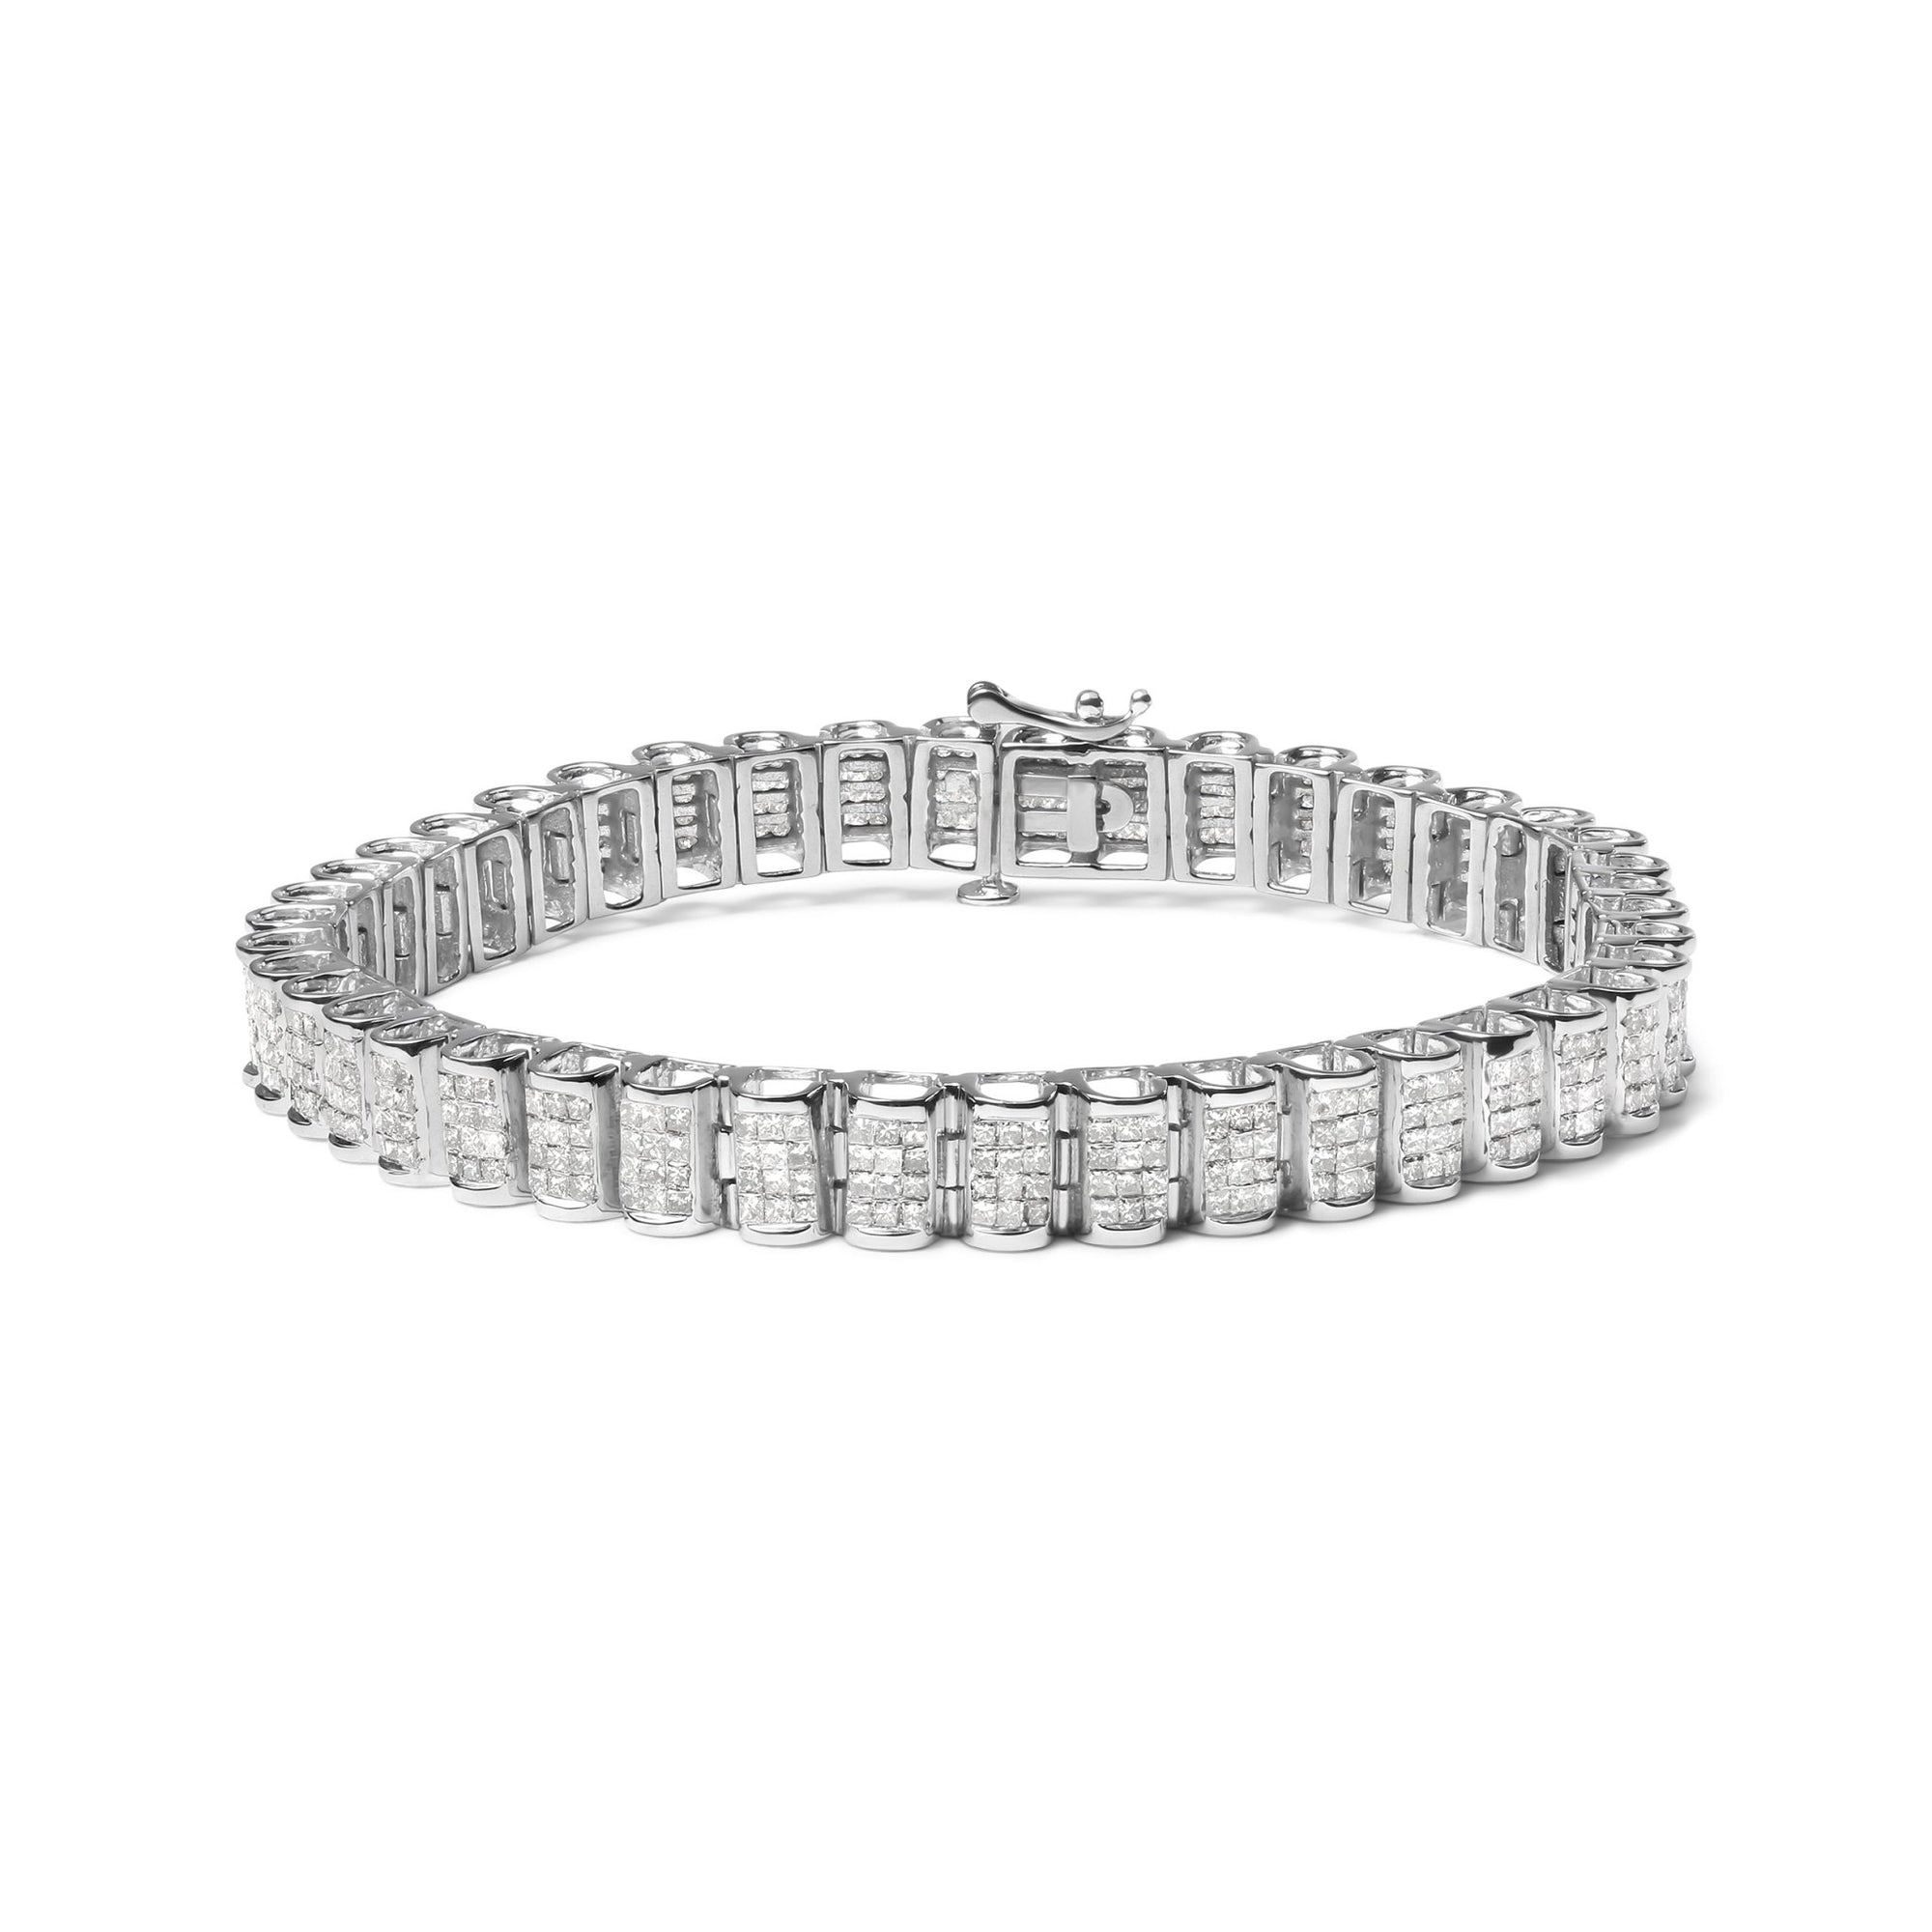 14K Yellow Gold 5.0 Cttw Invisible Set Princess-cut Diamond Buckle Link Tennis Bracelet (H-I Color, SI2-I1 Clarity) - Size 7.25" - LinkagejewelrydesignLinkagejewelrydesign